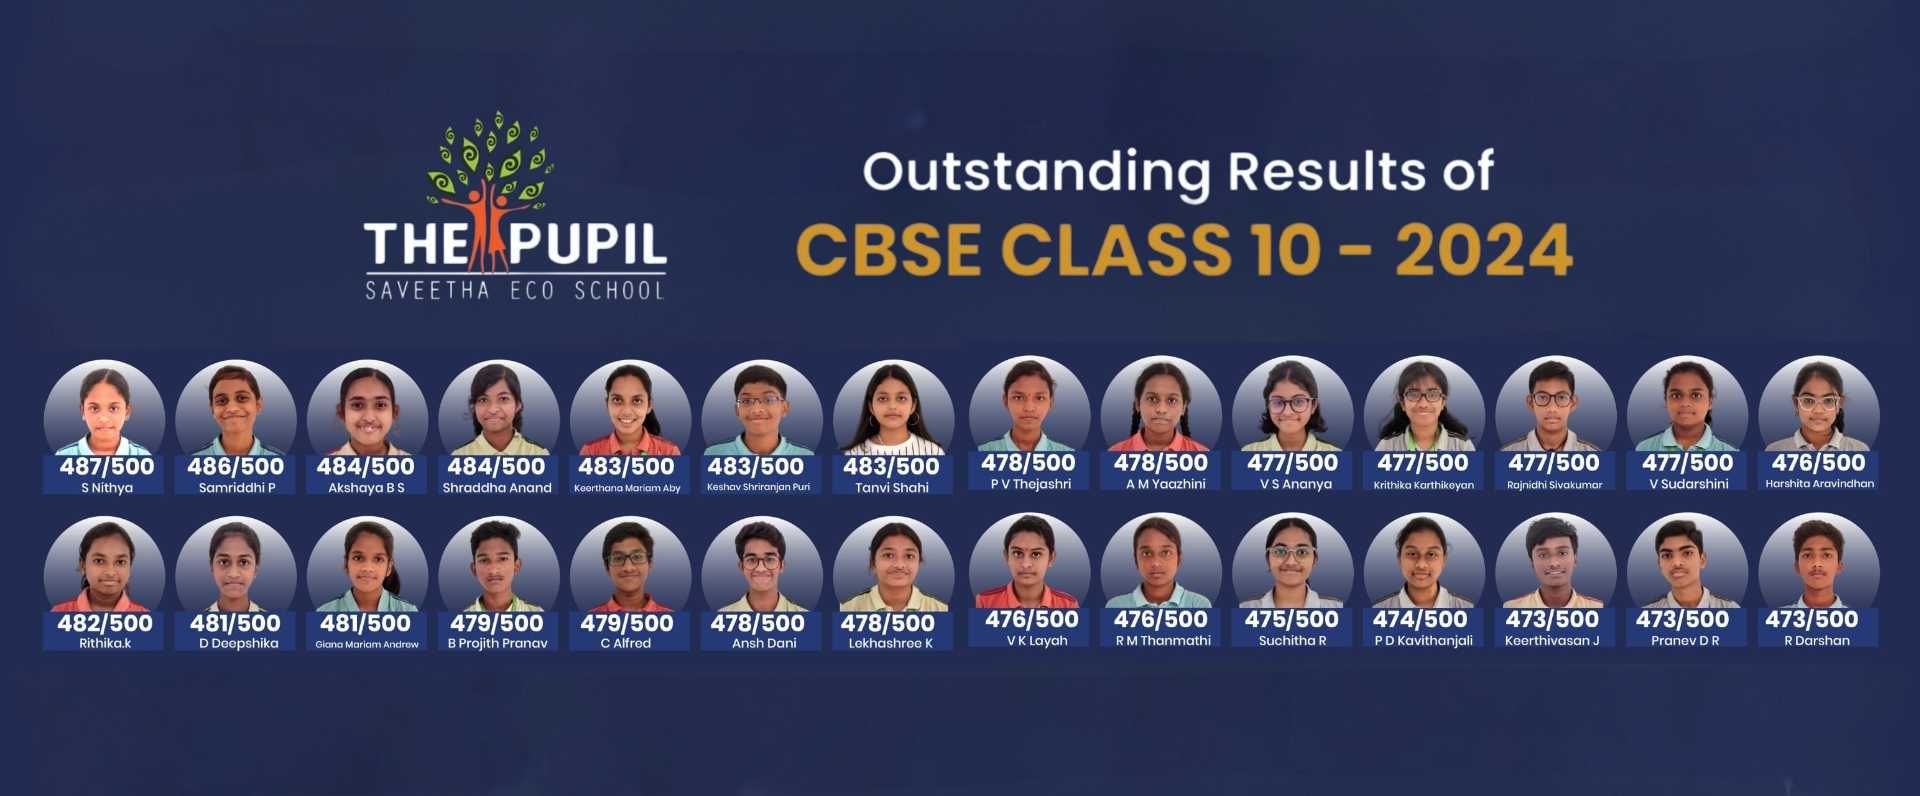 Outstanding Results of CBSE CLASS 10-2024